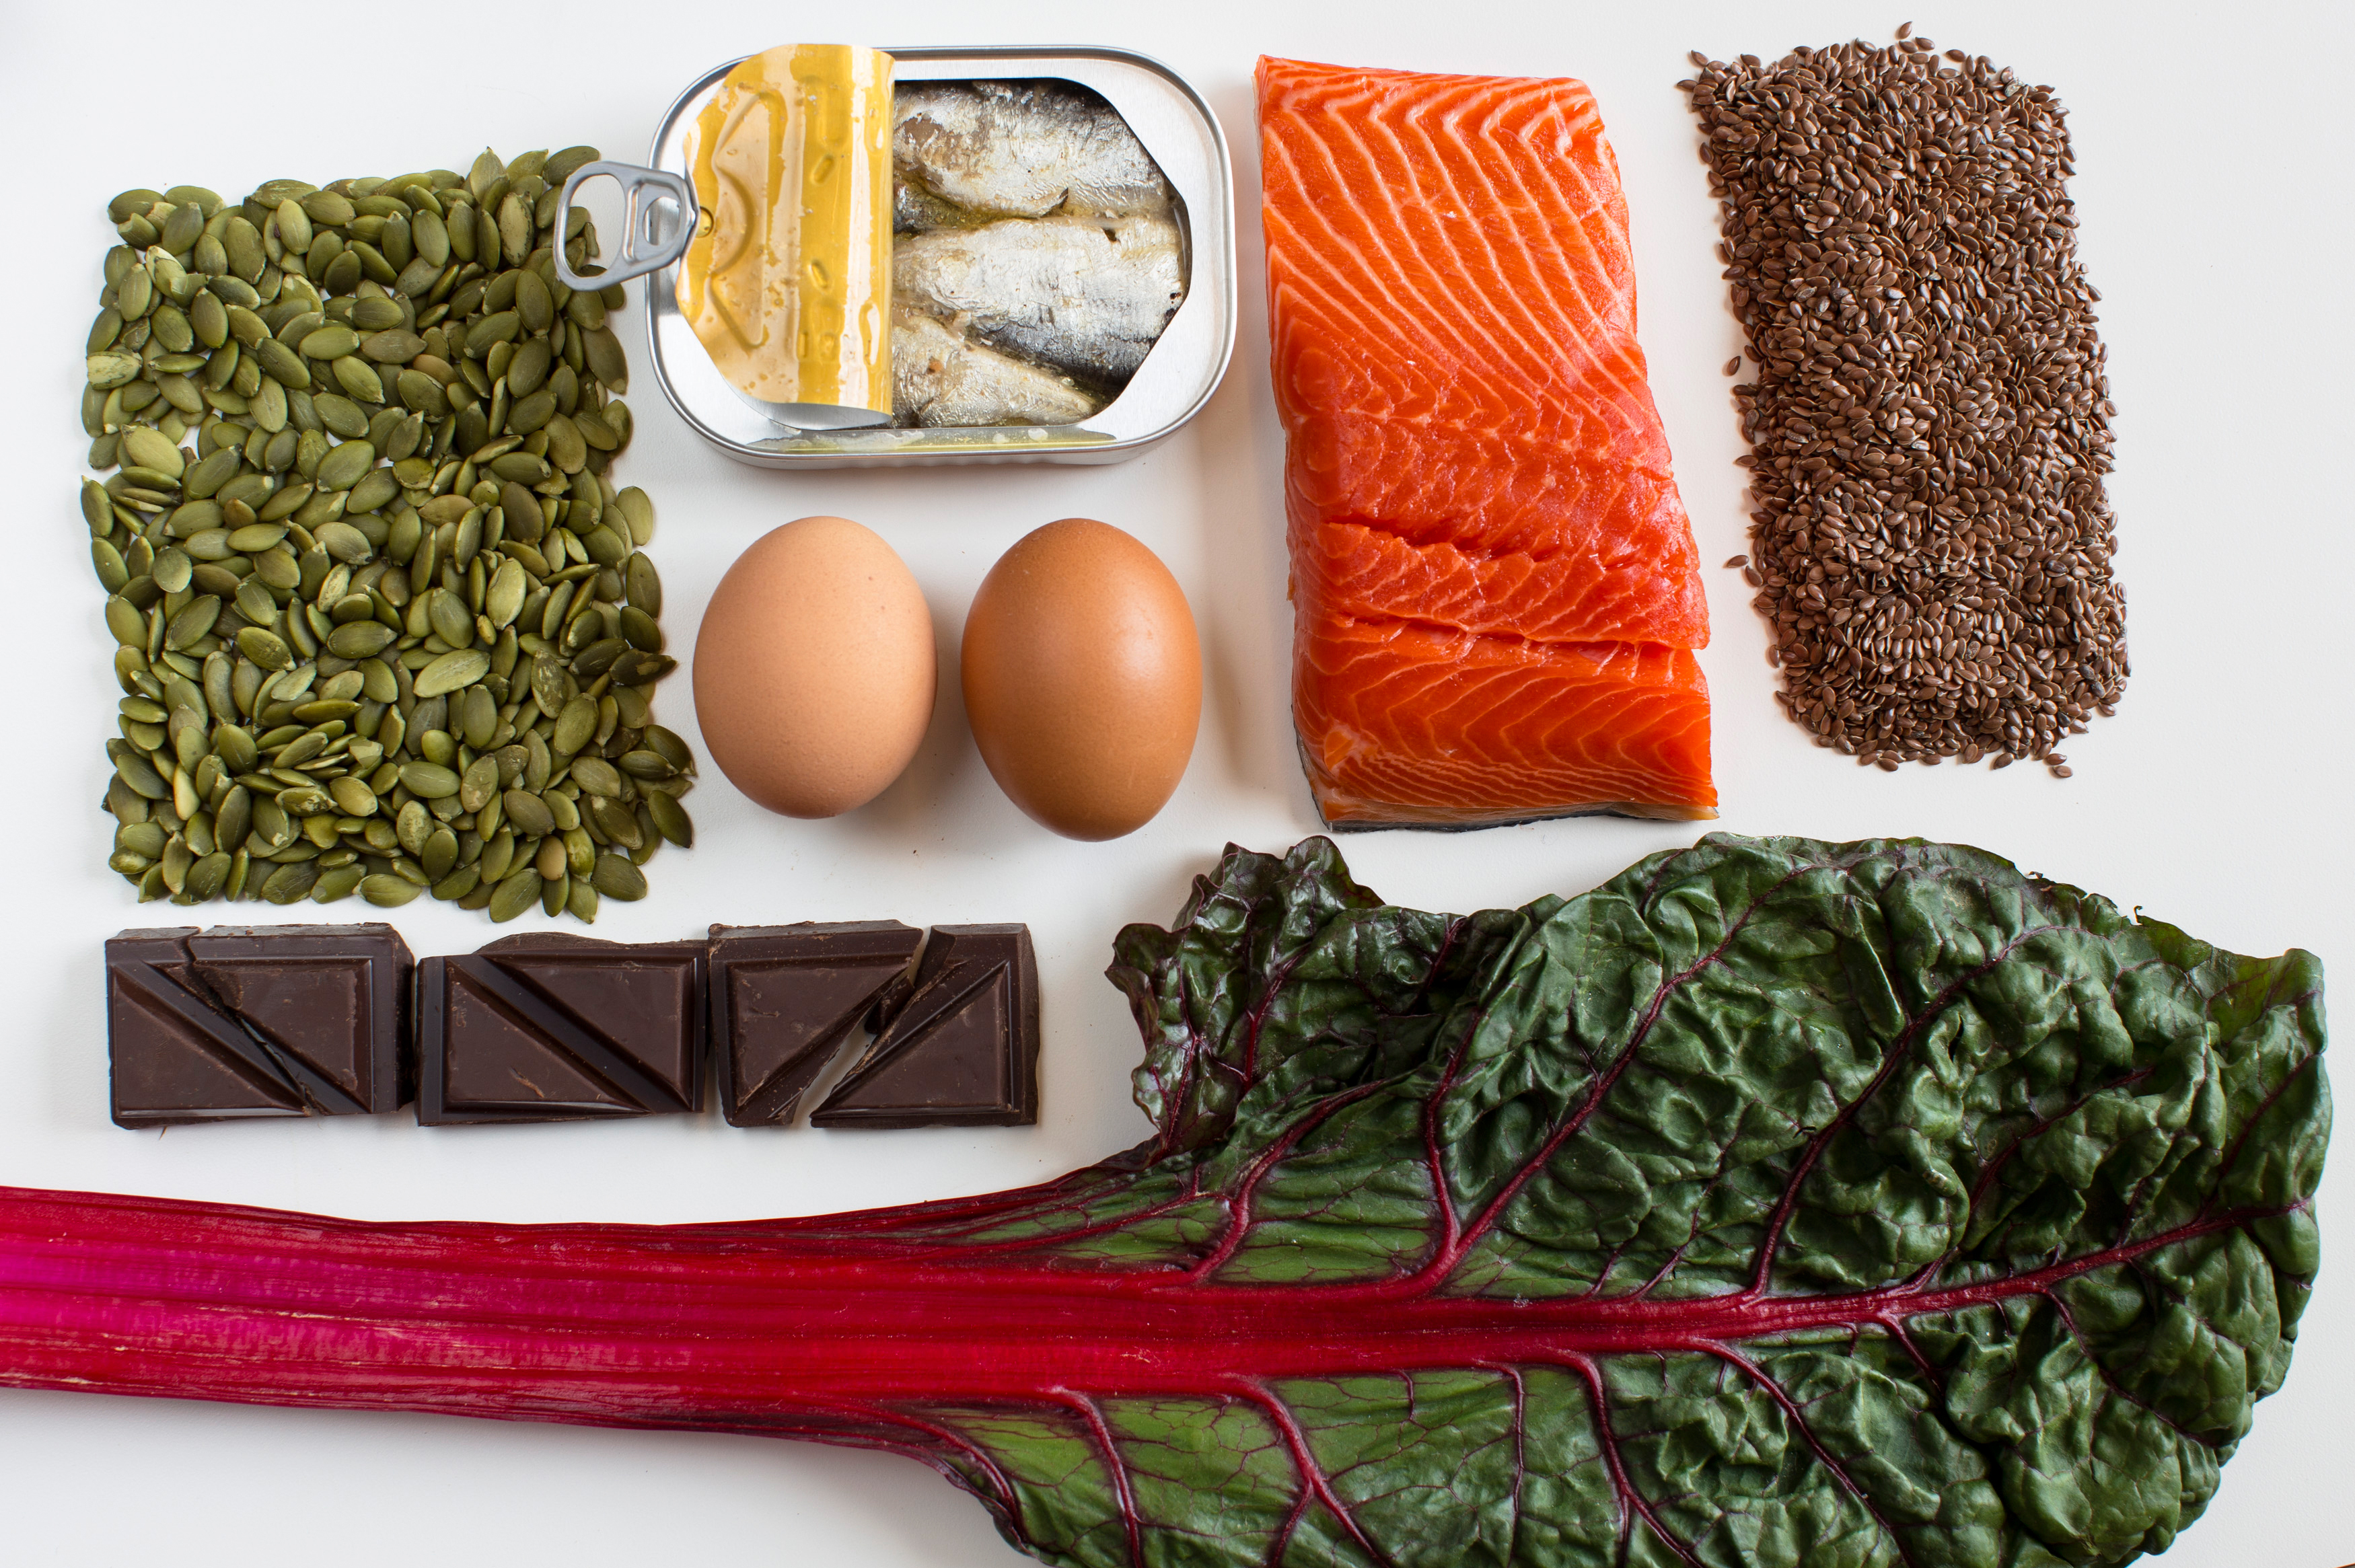 A nutrient-dense diet may help tamp down stress. And these foods may help boost our moods (clockwise from left): pumpkin seeds, sardines, eggs, salmon, flax seeds, Swiss chard and dark chocolate. Photo: Meredith Rizzo/NPR